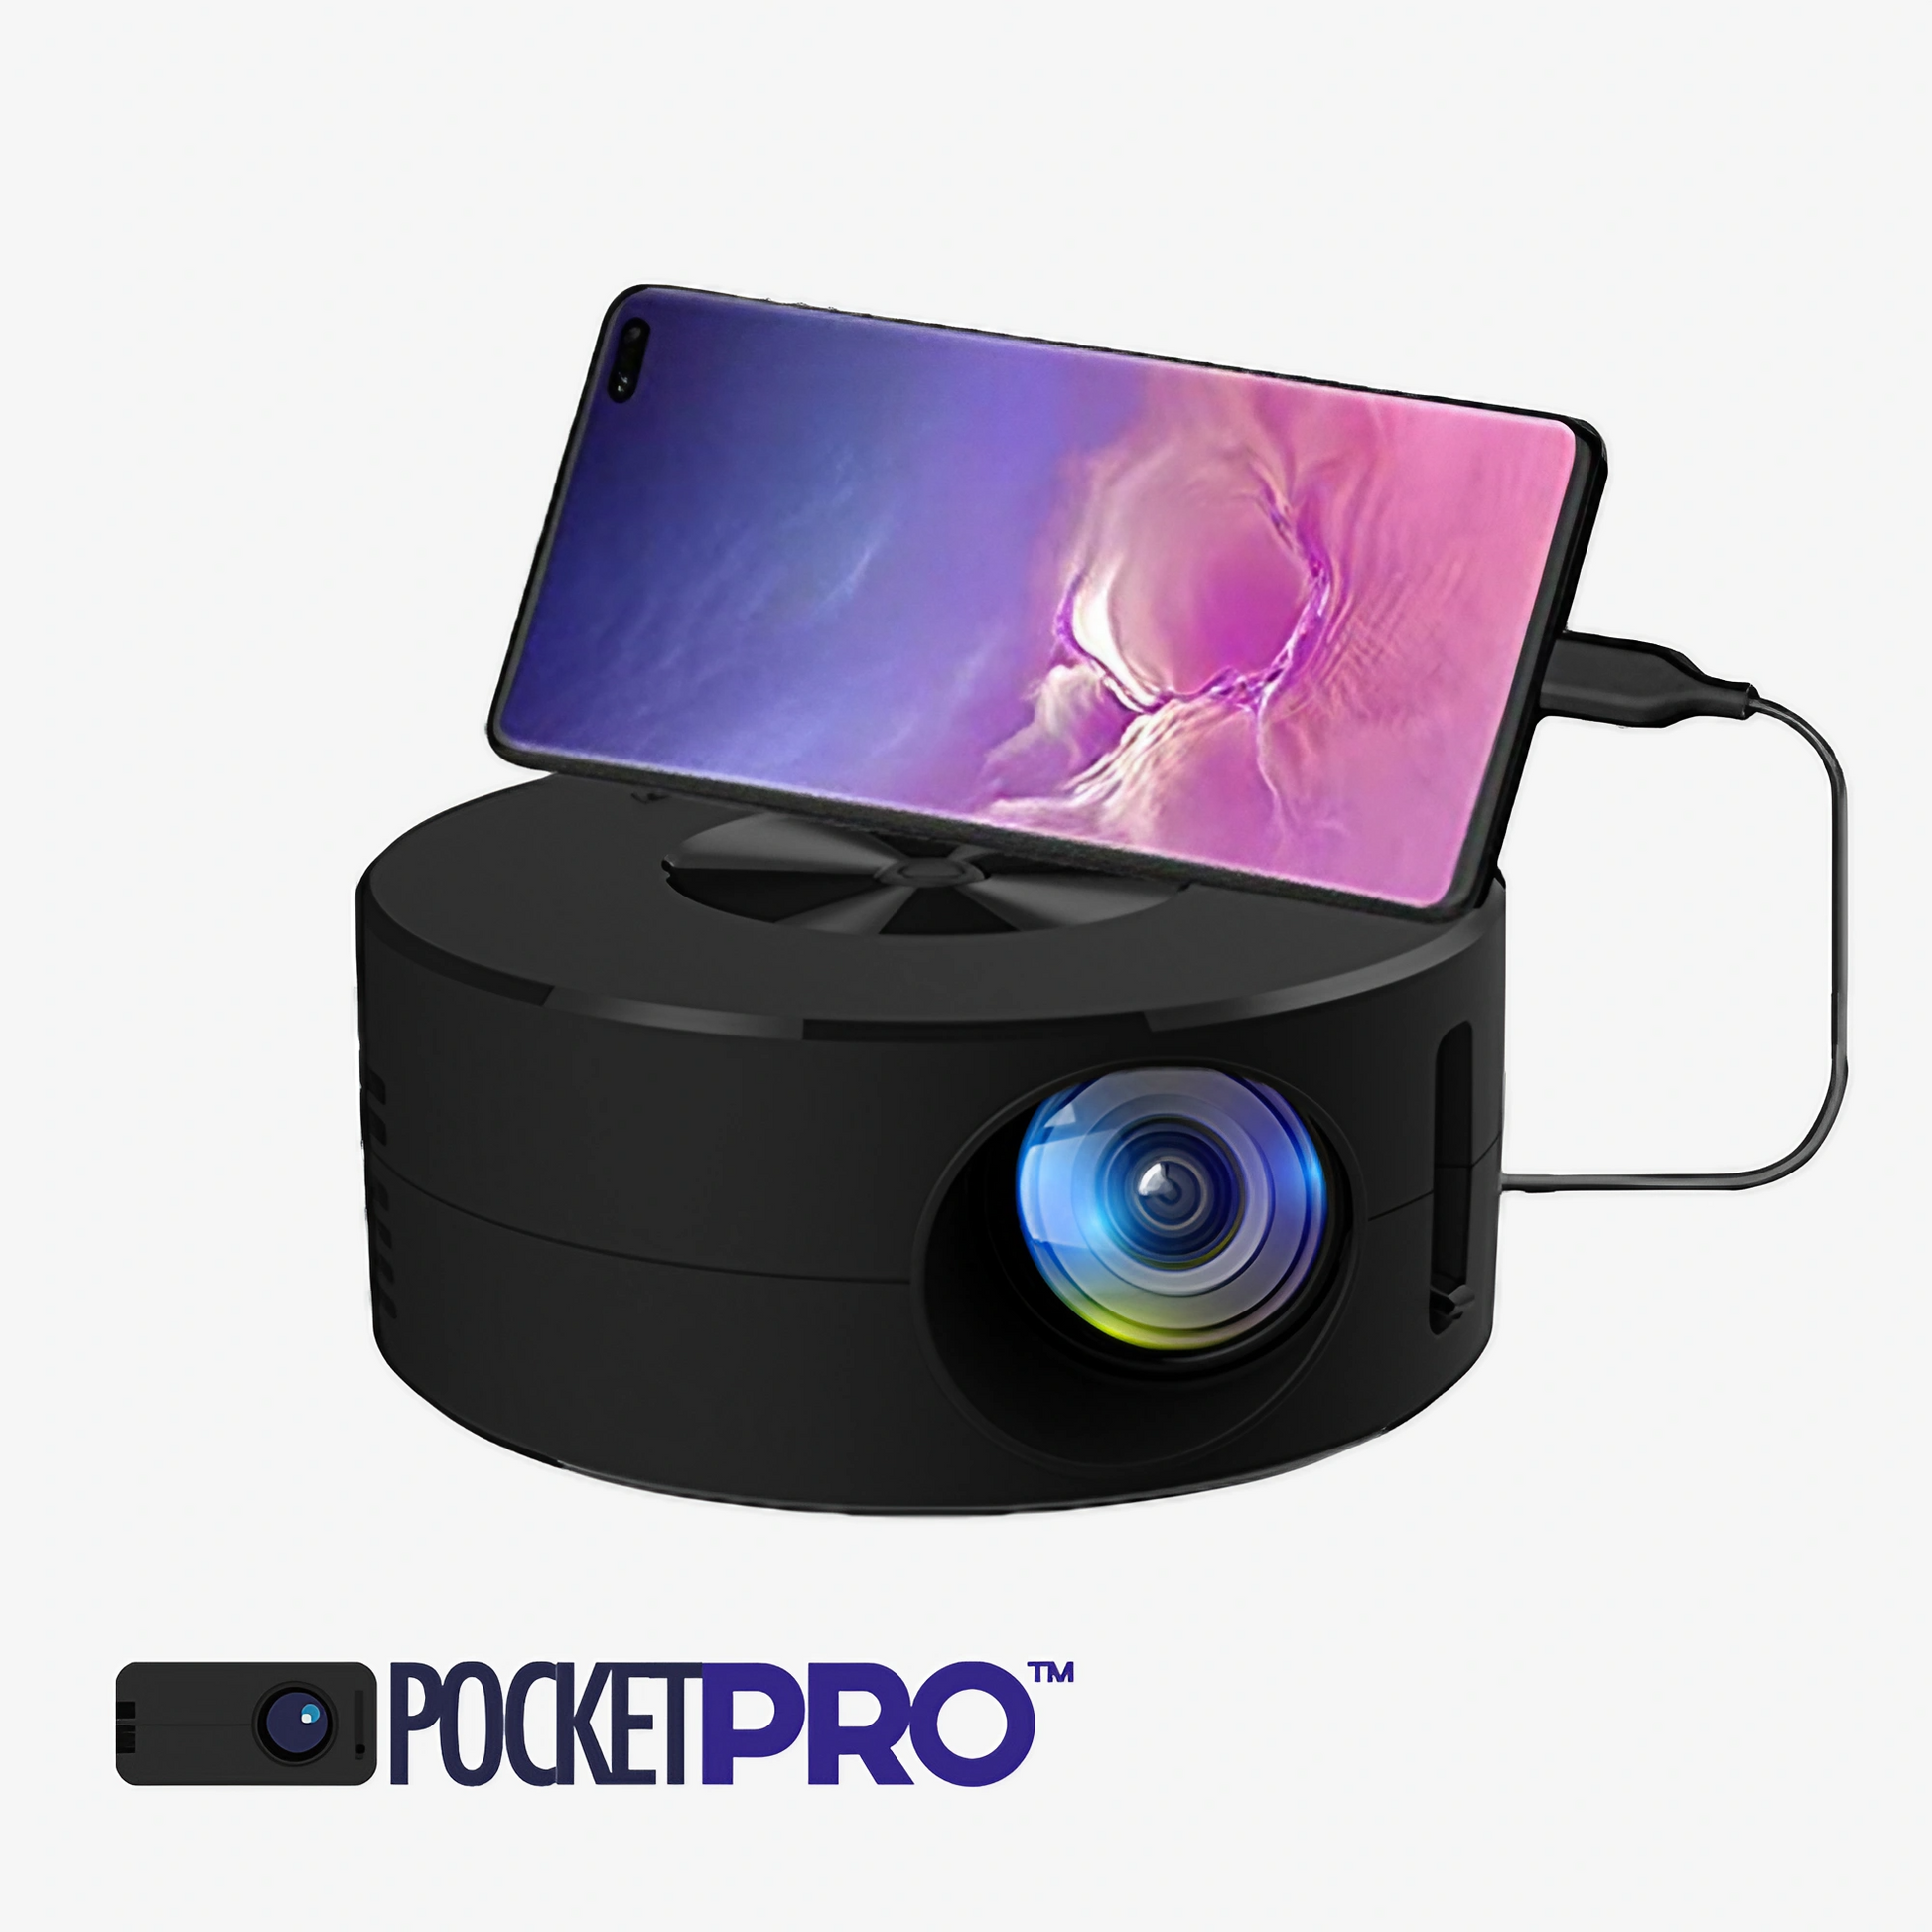 The PocketPro's™ complete package, including the projector, cable, remote control, user manual, and adjustable stand - everything you need for a portable home theater experience.